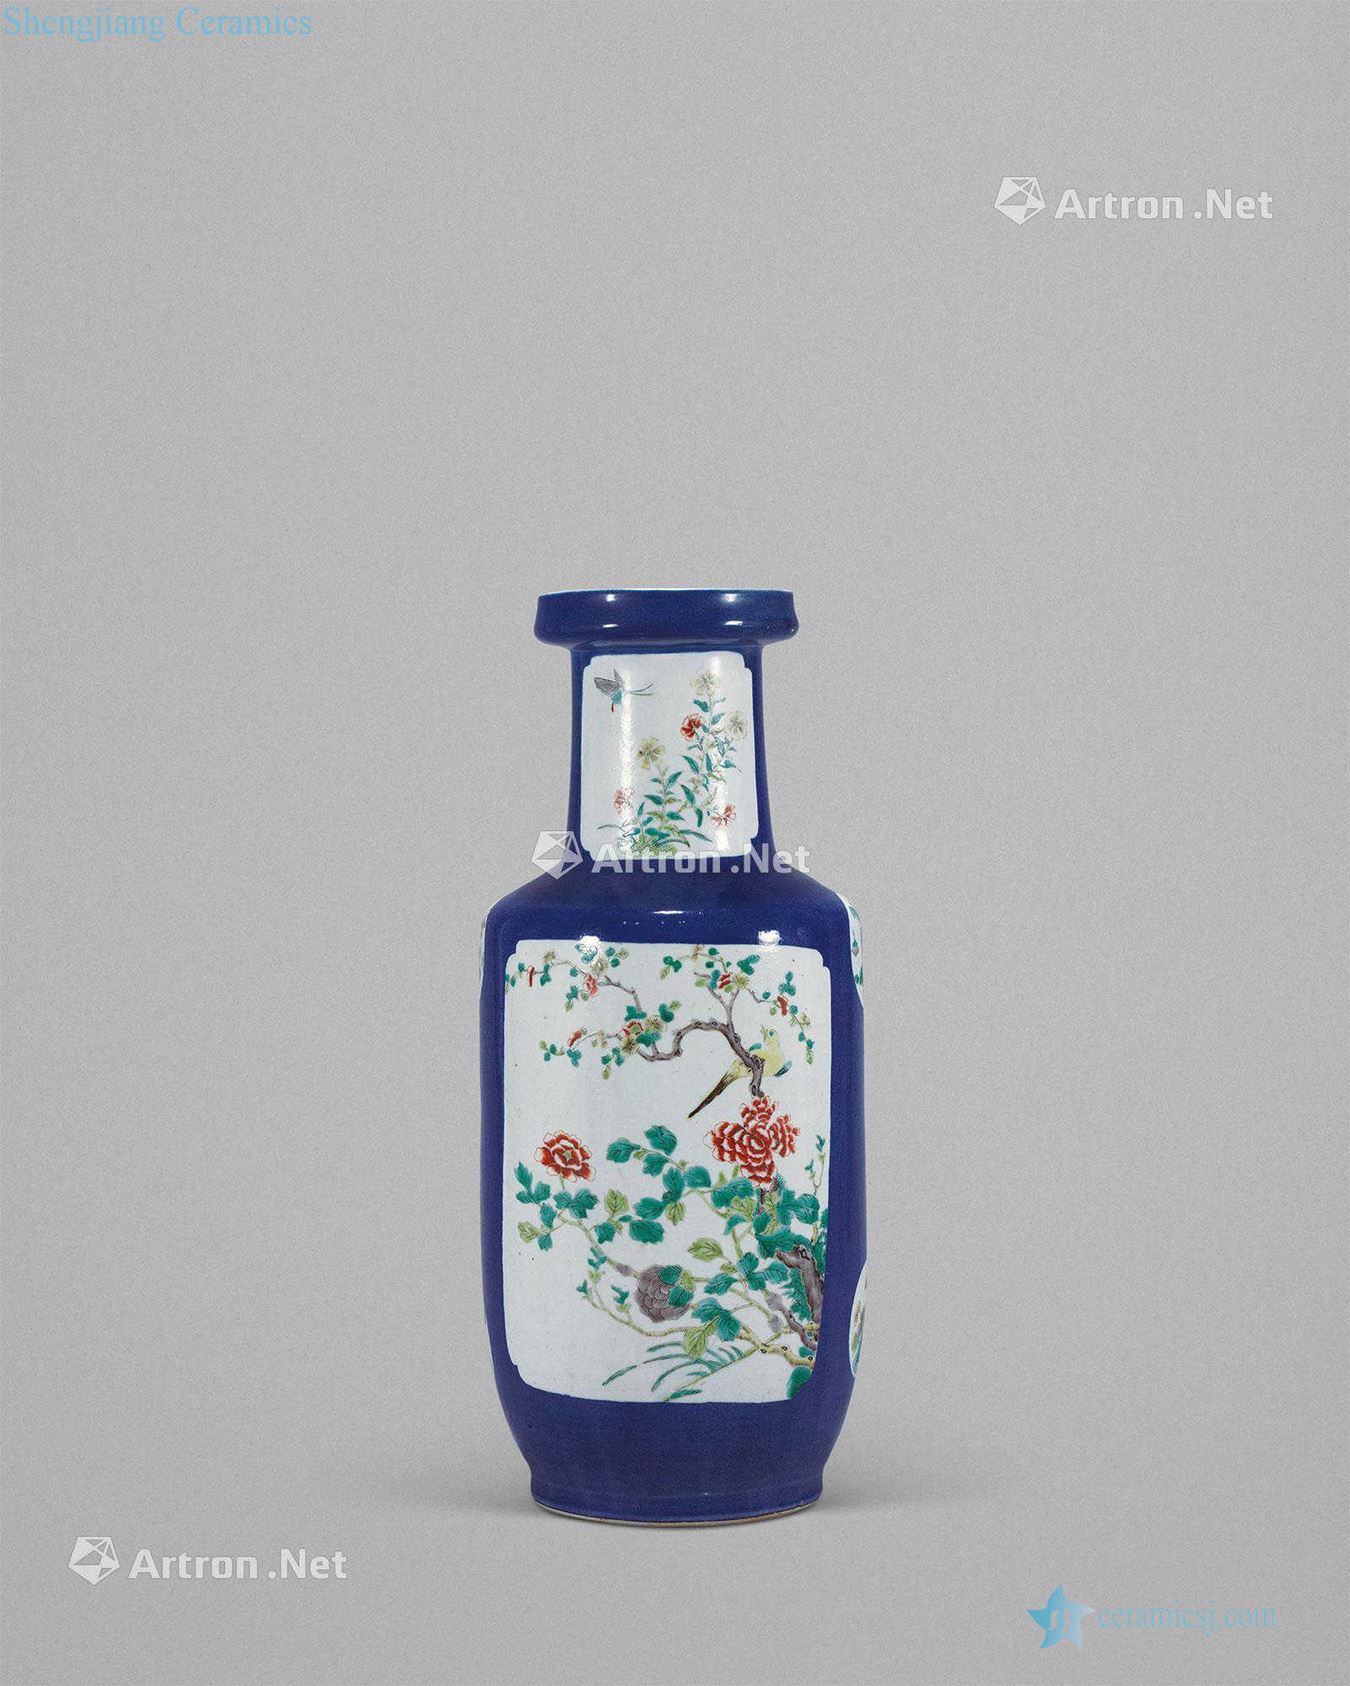 Clear blue glaze medallion colorful flowers and birds were bottles